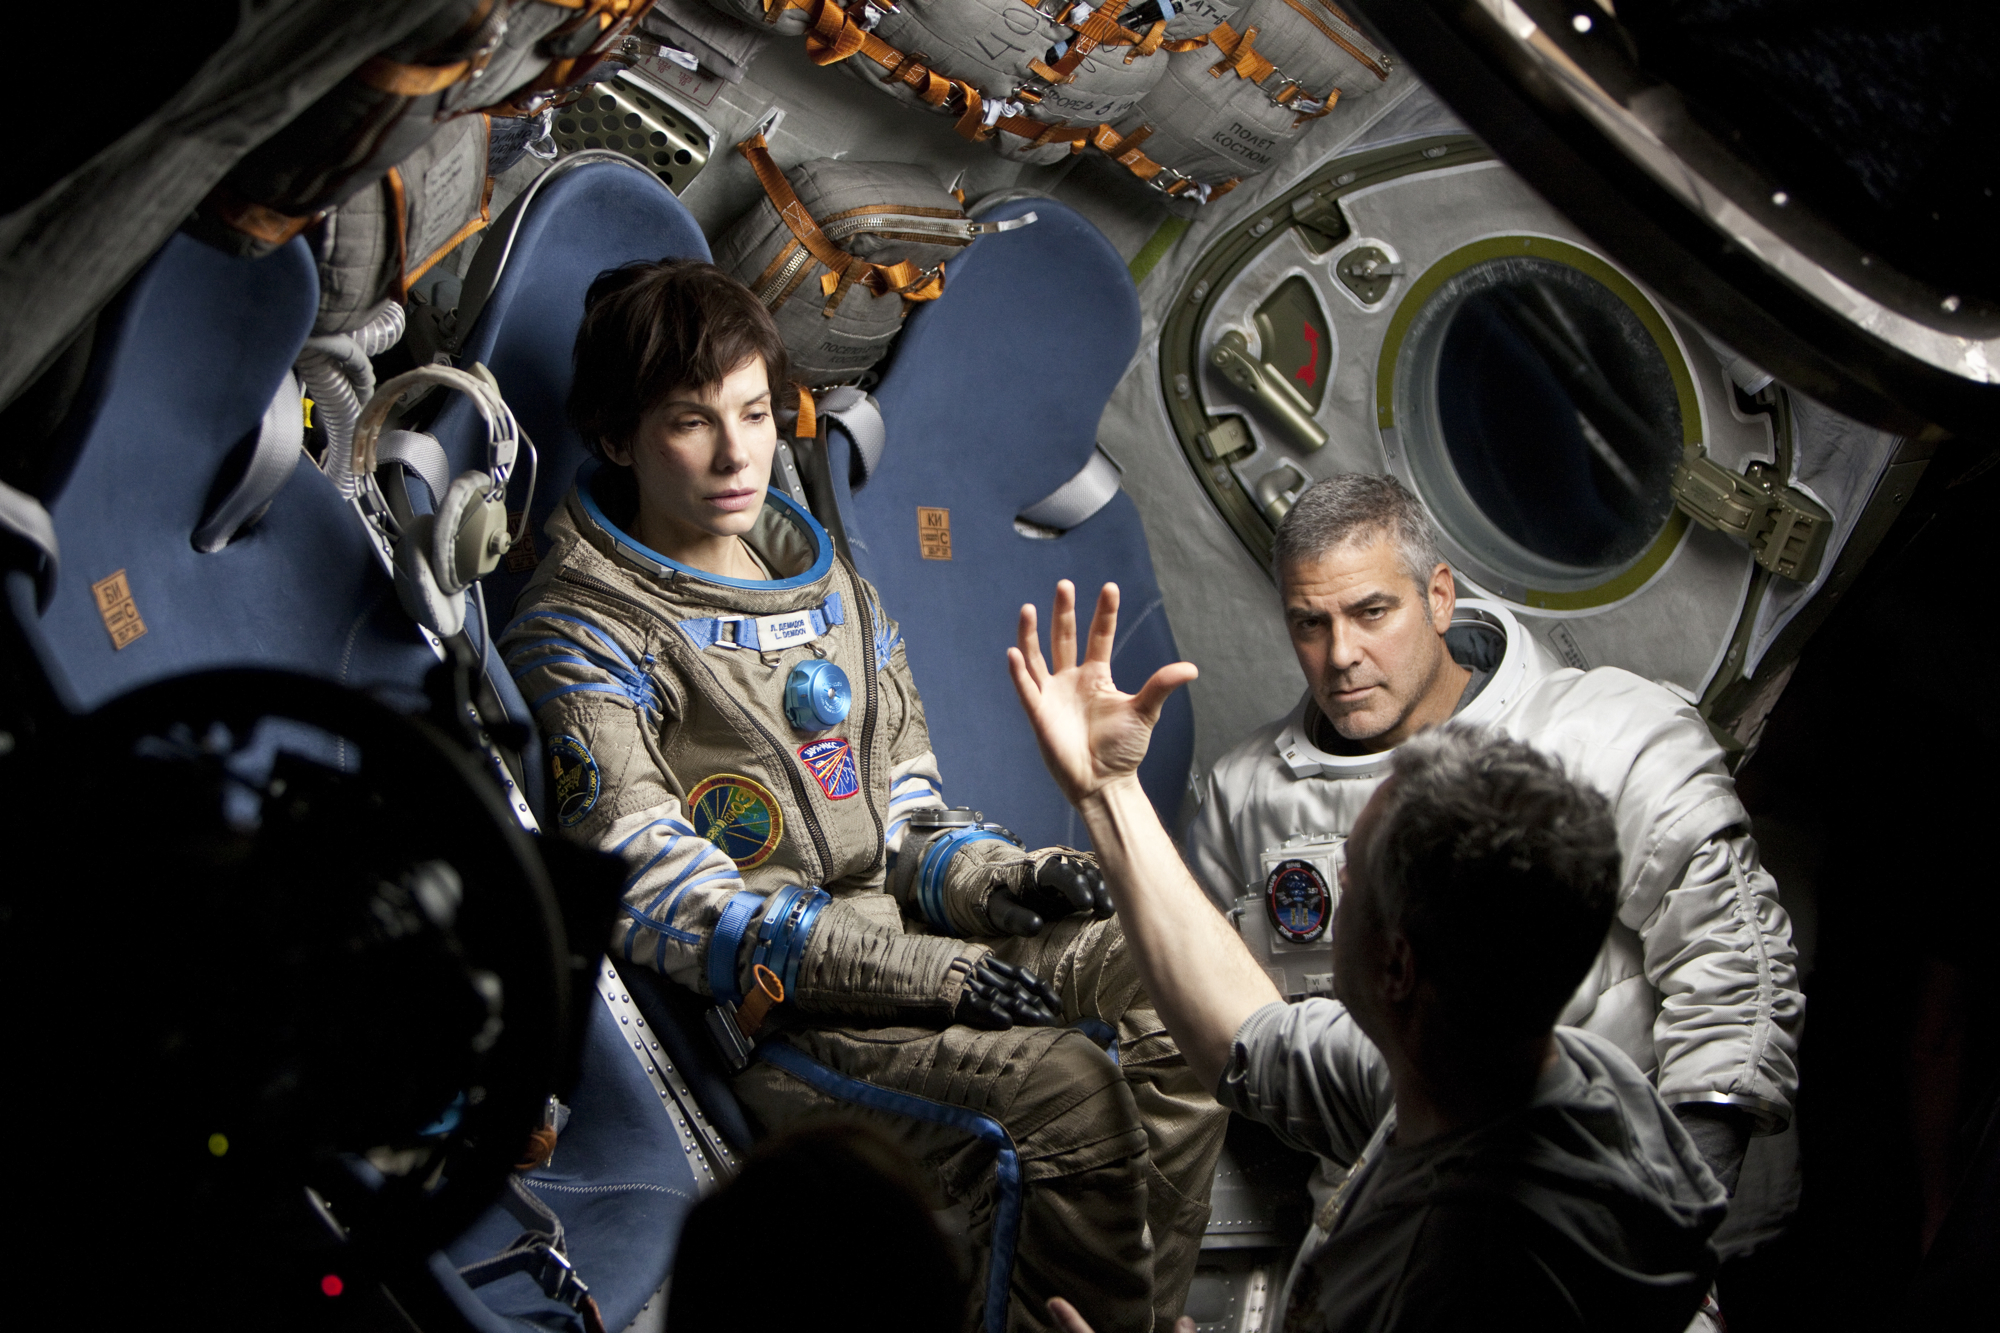 Alfonso Cuarón’s ‘Gravity’: NY Premiere Pass Sweepstakes!